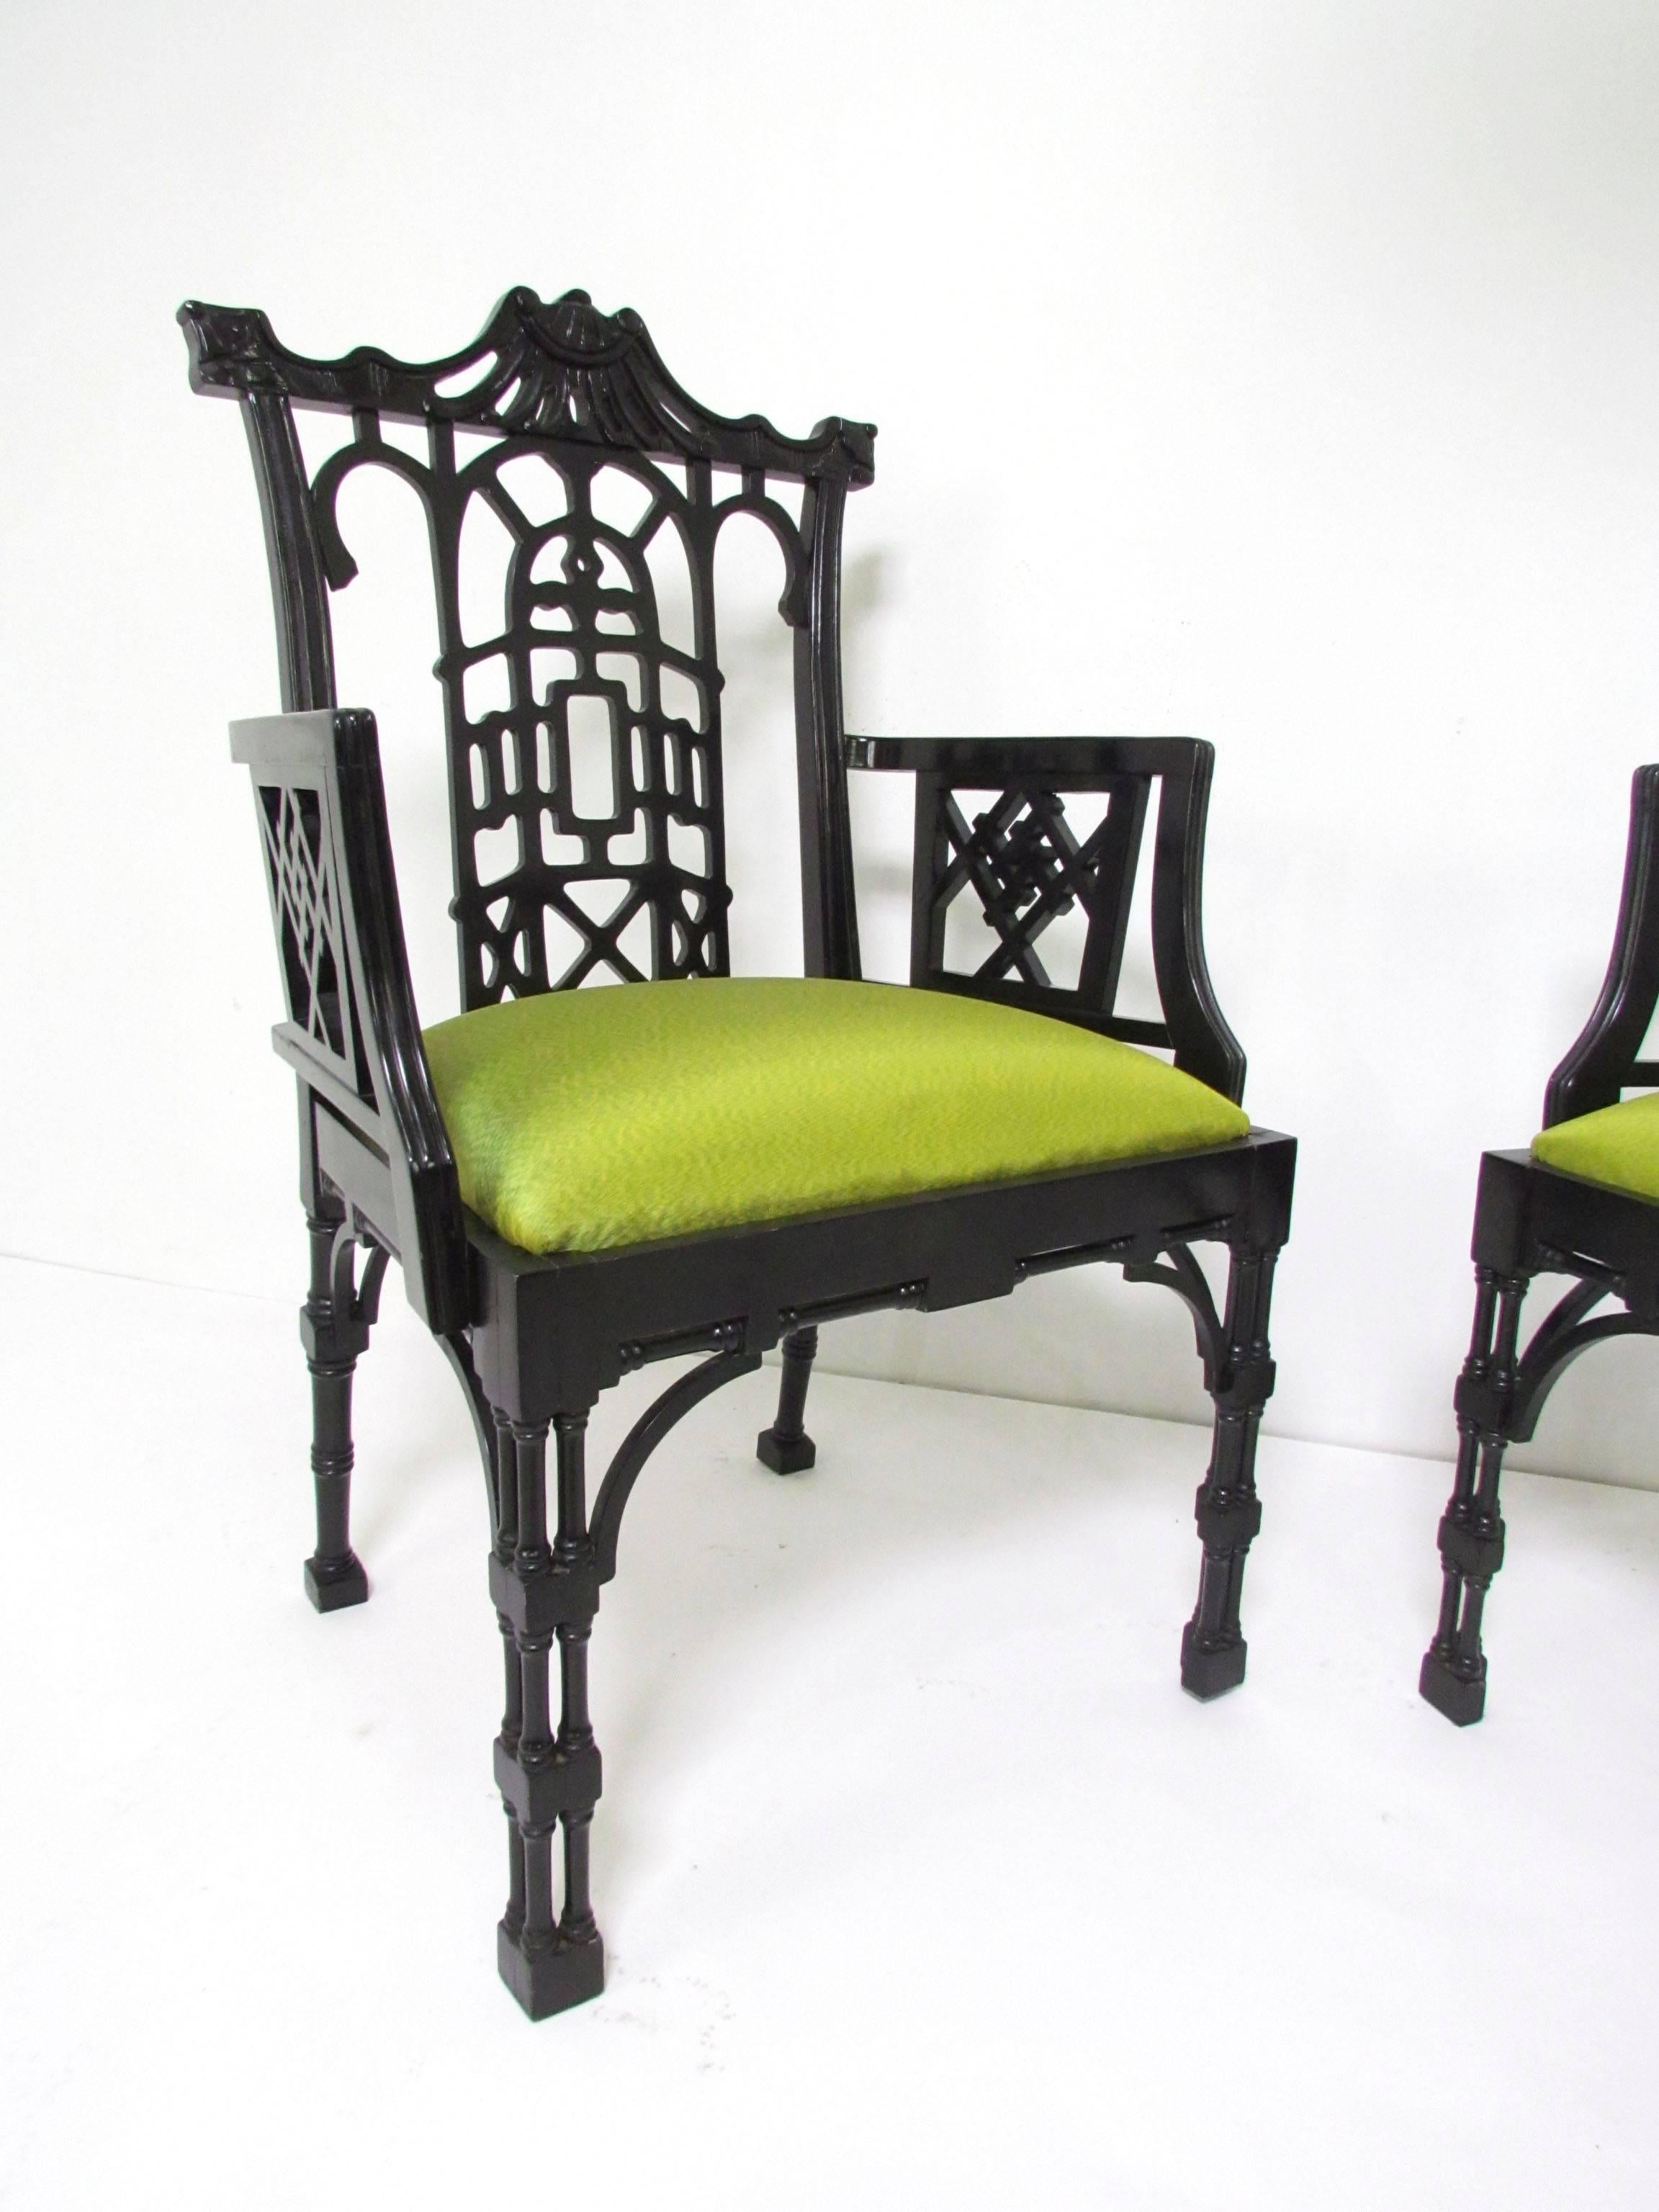 Pair of carved and lacquered fretwork armchairs in the Chinese Chippendale style, circa 1980s. Silk upholstered cushions.